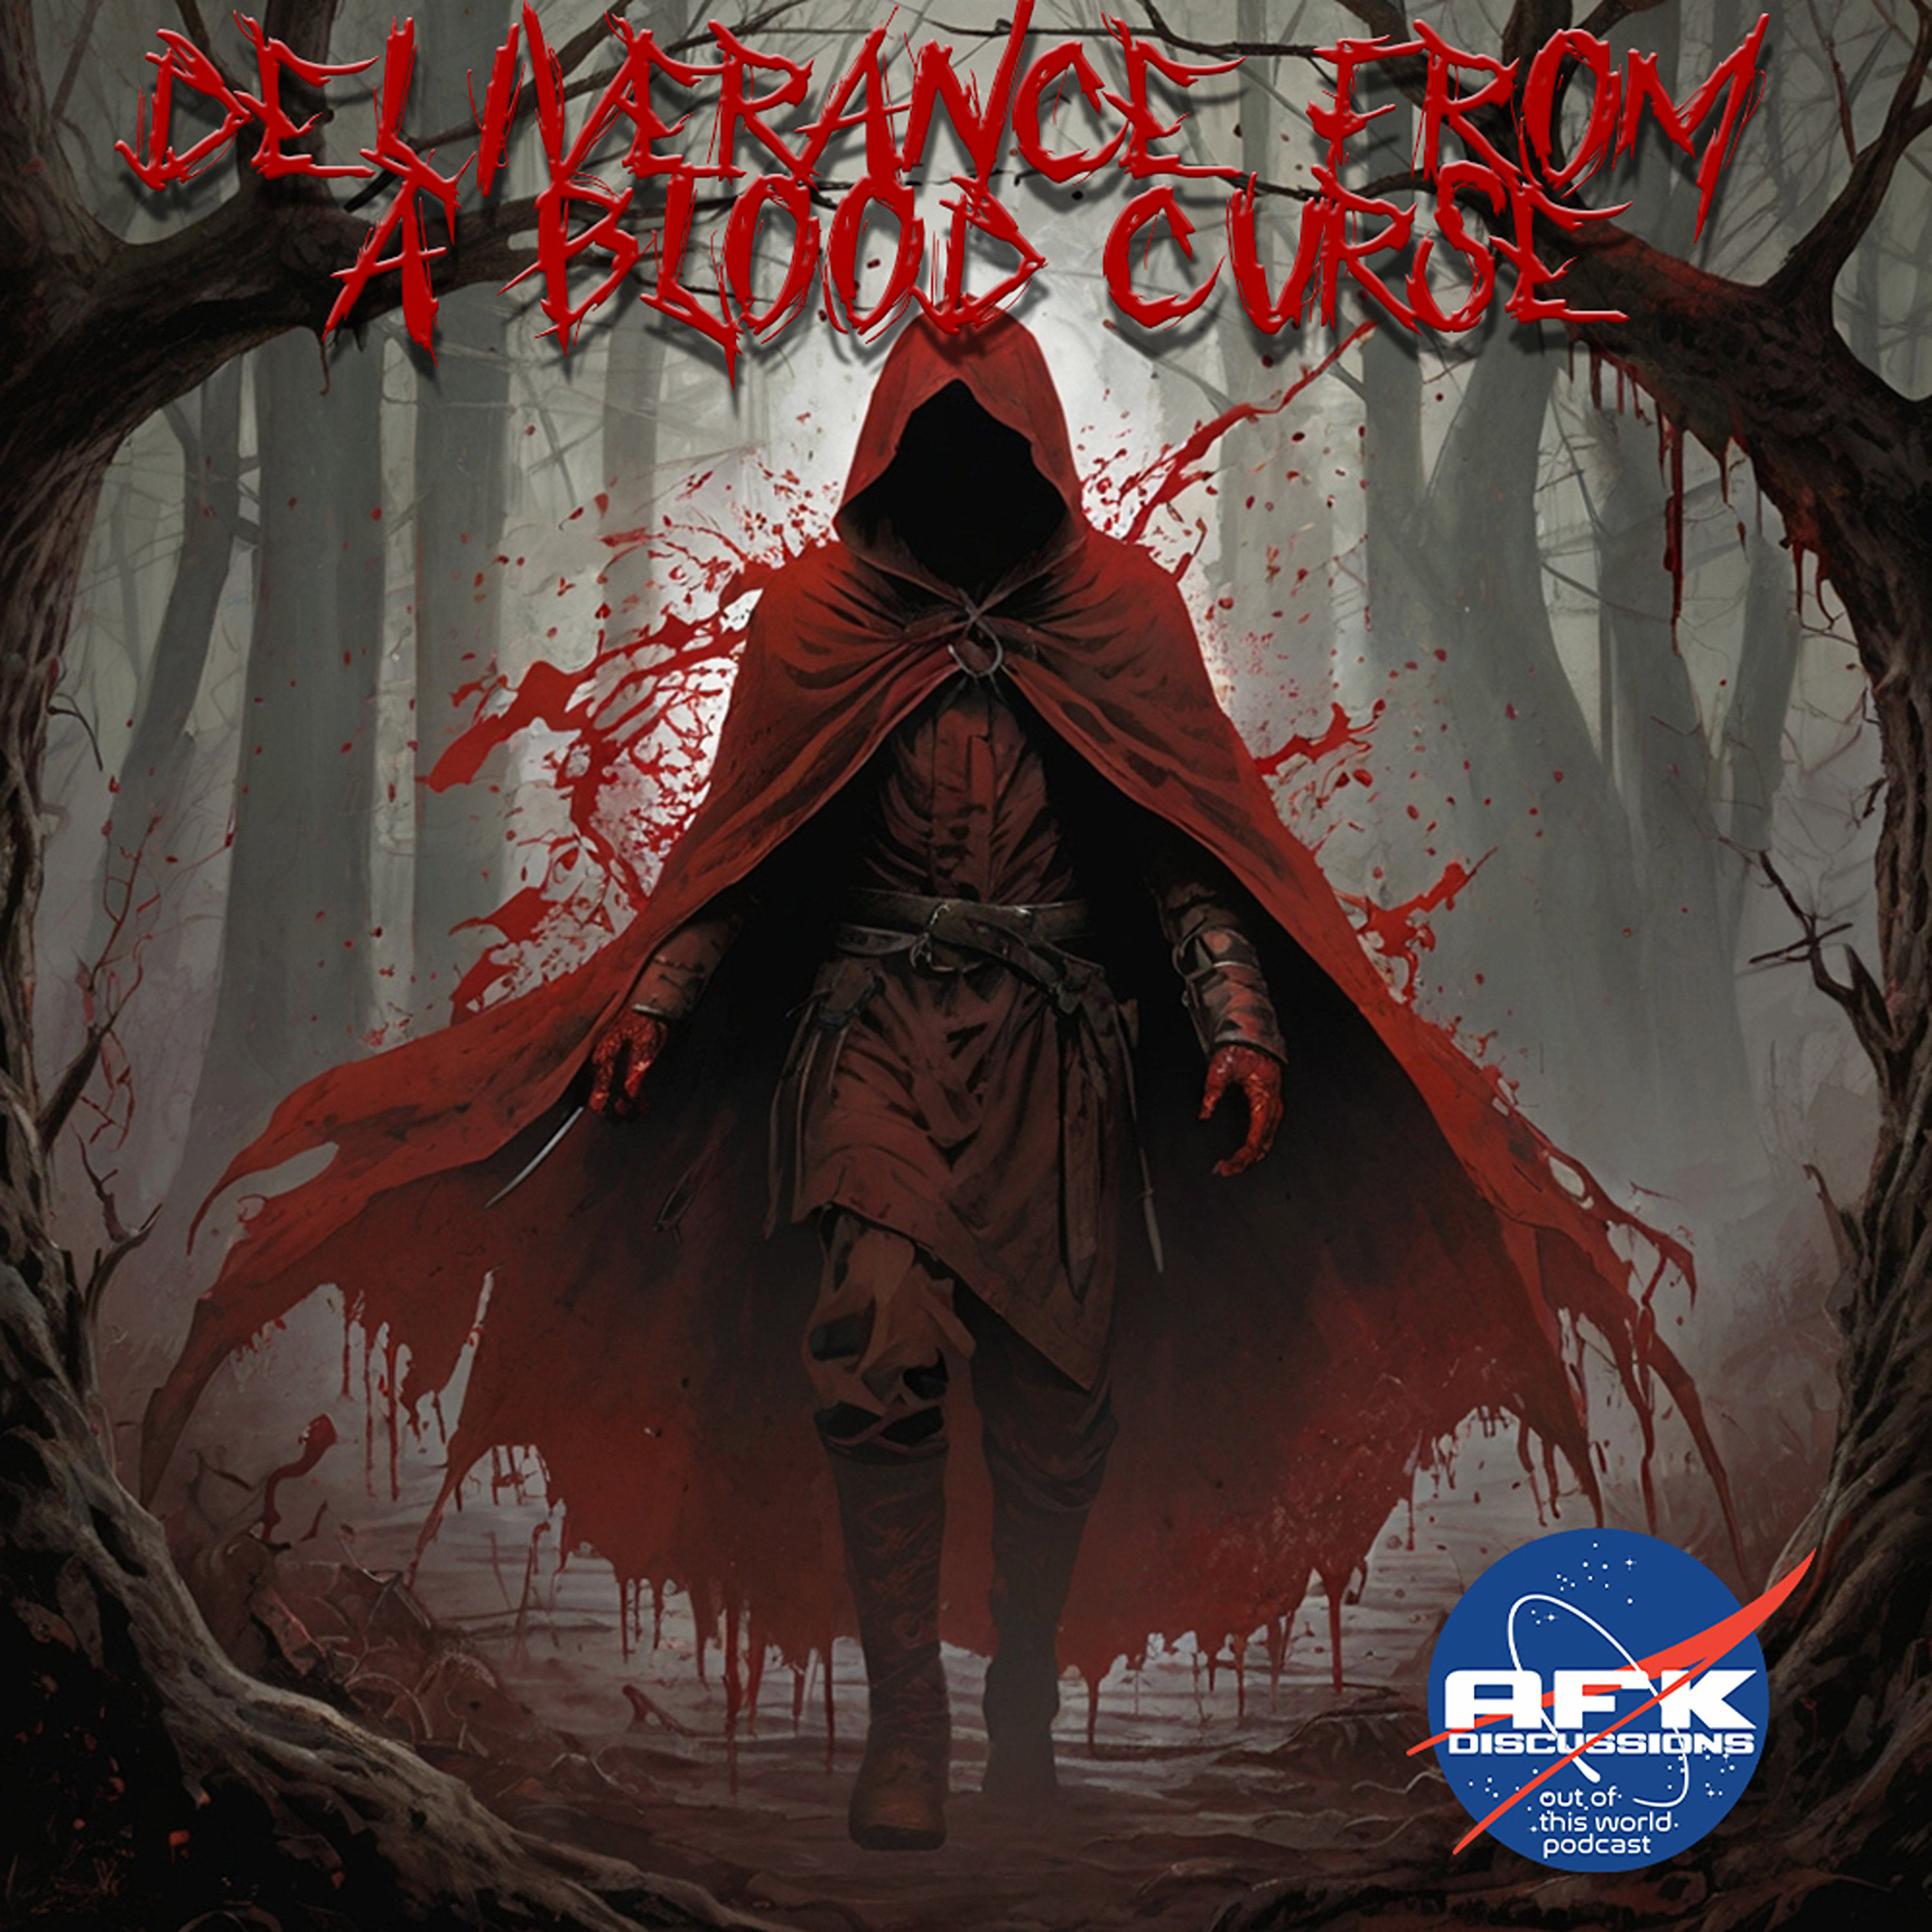 Deliverance from a Blood Curse: Daniel Swarthout